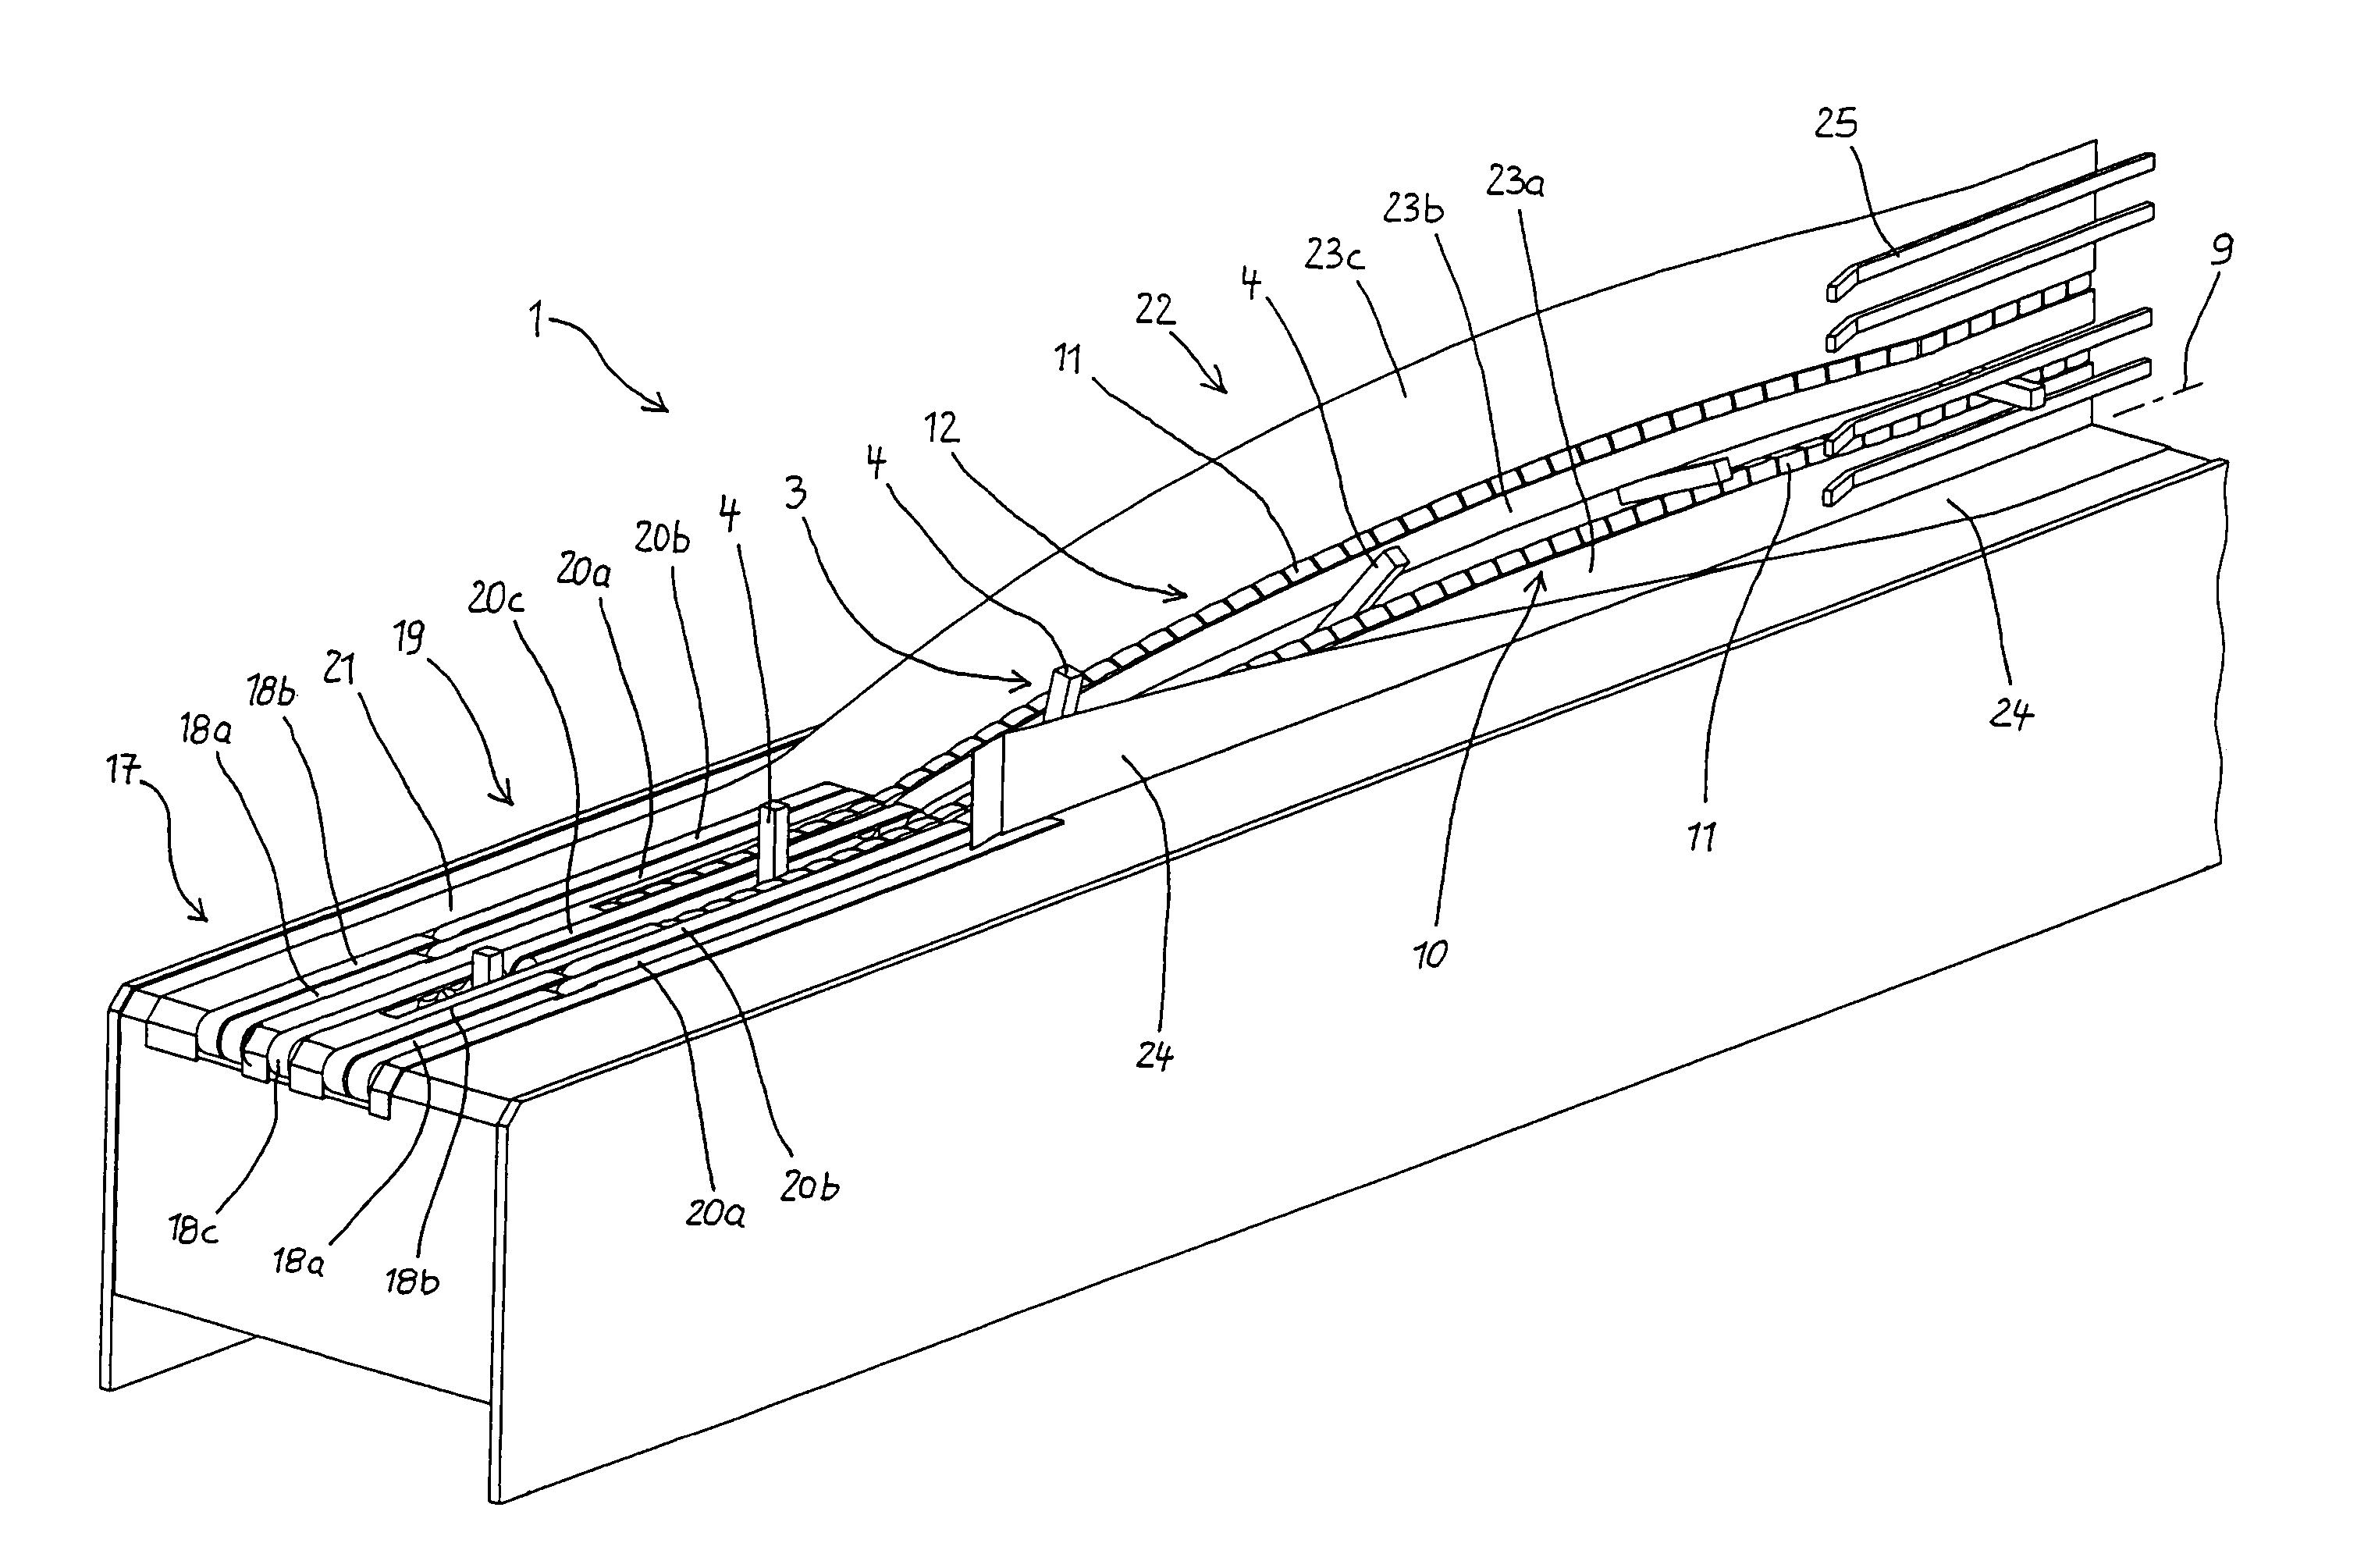 Device for transferring continuously transported printing products from a flat lying position into an upright position or vice versa